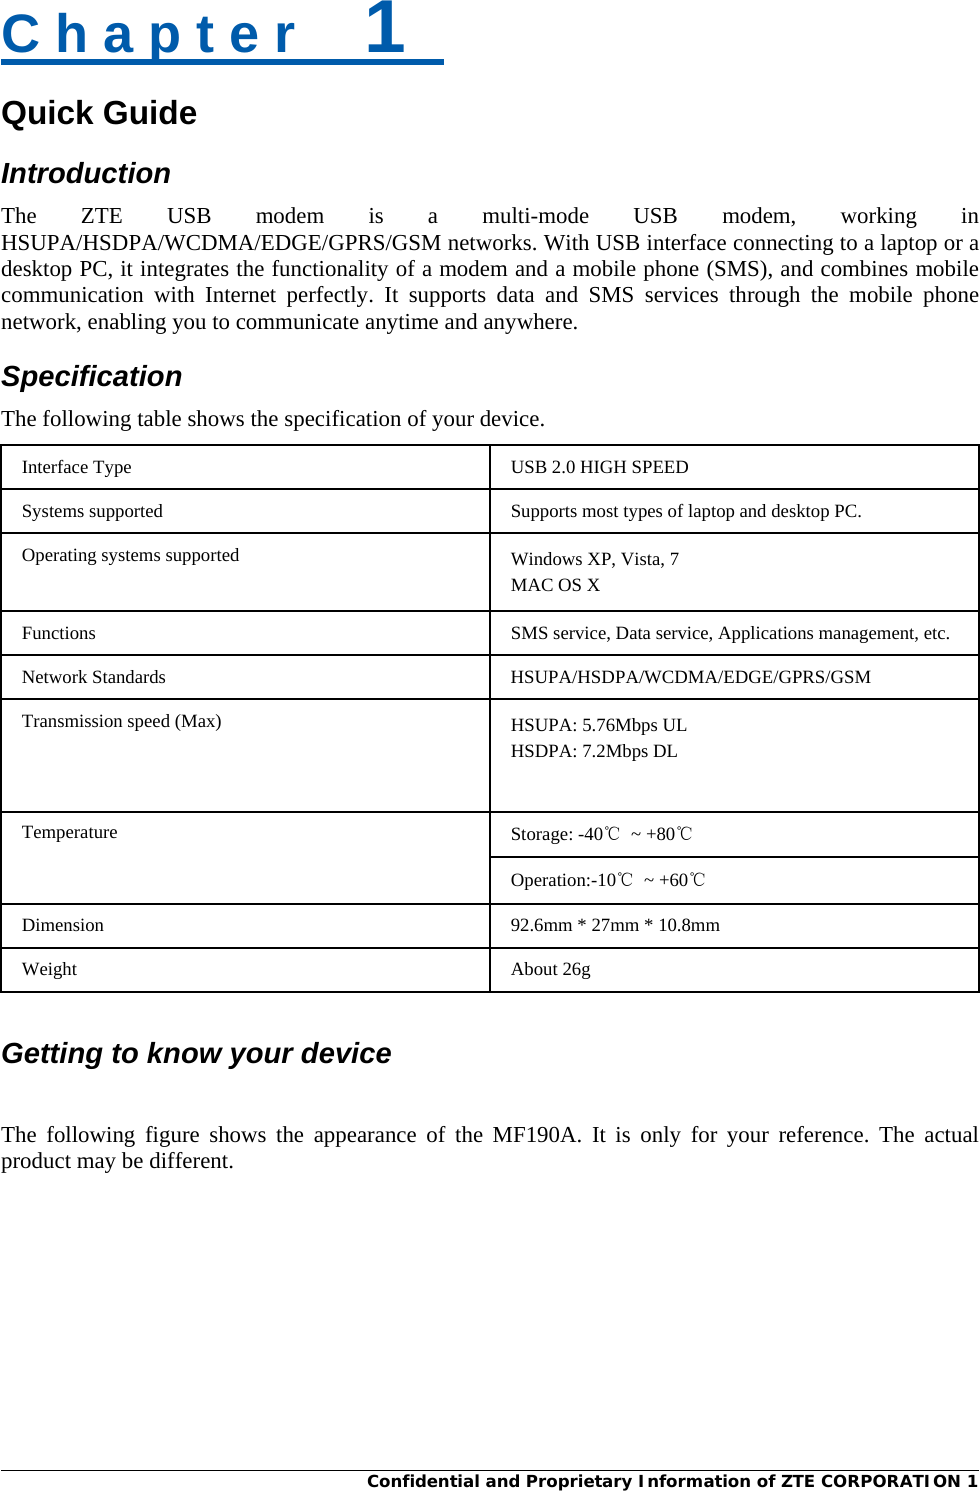  Confidential and Proprietary Information of ZTE CORPORATION 1C h a p t e r    1   Quick Guide Introduction The ZTE USB modem is a multi-mode USB modem, working in HSUPA/HSDPA/WCDMA/EDGE/GPRS/GSM networks. With USB interface connecting to a laptop or a desktop PC, it integrates the functionality of a modem and a mobile phone (SMS), and combines mobile communication with Internet perfectly. It supports data and SMS services through the mobile phone network, enabling you to communicate anytime and anywhere. Specification The following table shows the specification of your device. Interface Type  USB 2.0 HIGH SPEED Systems supported  Supports most types of laptop and desktop PC. Operating systems supported  Windows XP, Vista, 7 MAC OS X Functions  SMS service, Data service, Applications management, etc. Network Standards  HSUPA/HSDPA/WCDMA/EDGE/GPRS/GSM Transmission speed (Max)  HSUPA: 5.76Mbps UL HSDPA: 7.2Mbps DL Temperature  Storage: -40℃ ~ +80℃ Operation:-10℃ ~ +60℃ Dimension 92.6mm * 27mm * 10.8mm Weight About 26g   Getting to know your device  The following figure shows the appearance of the MF190A. It is only for your reference. The actual product may be different. 